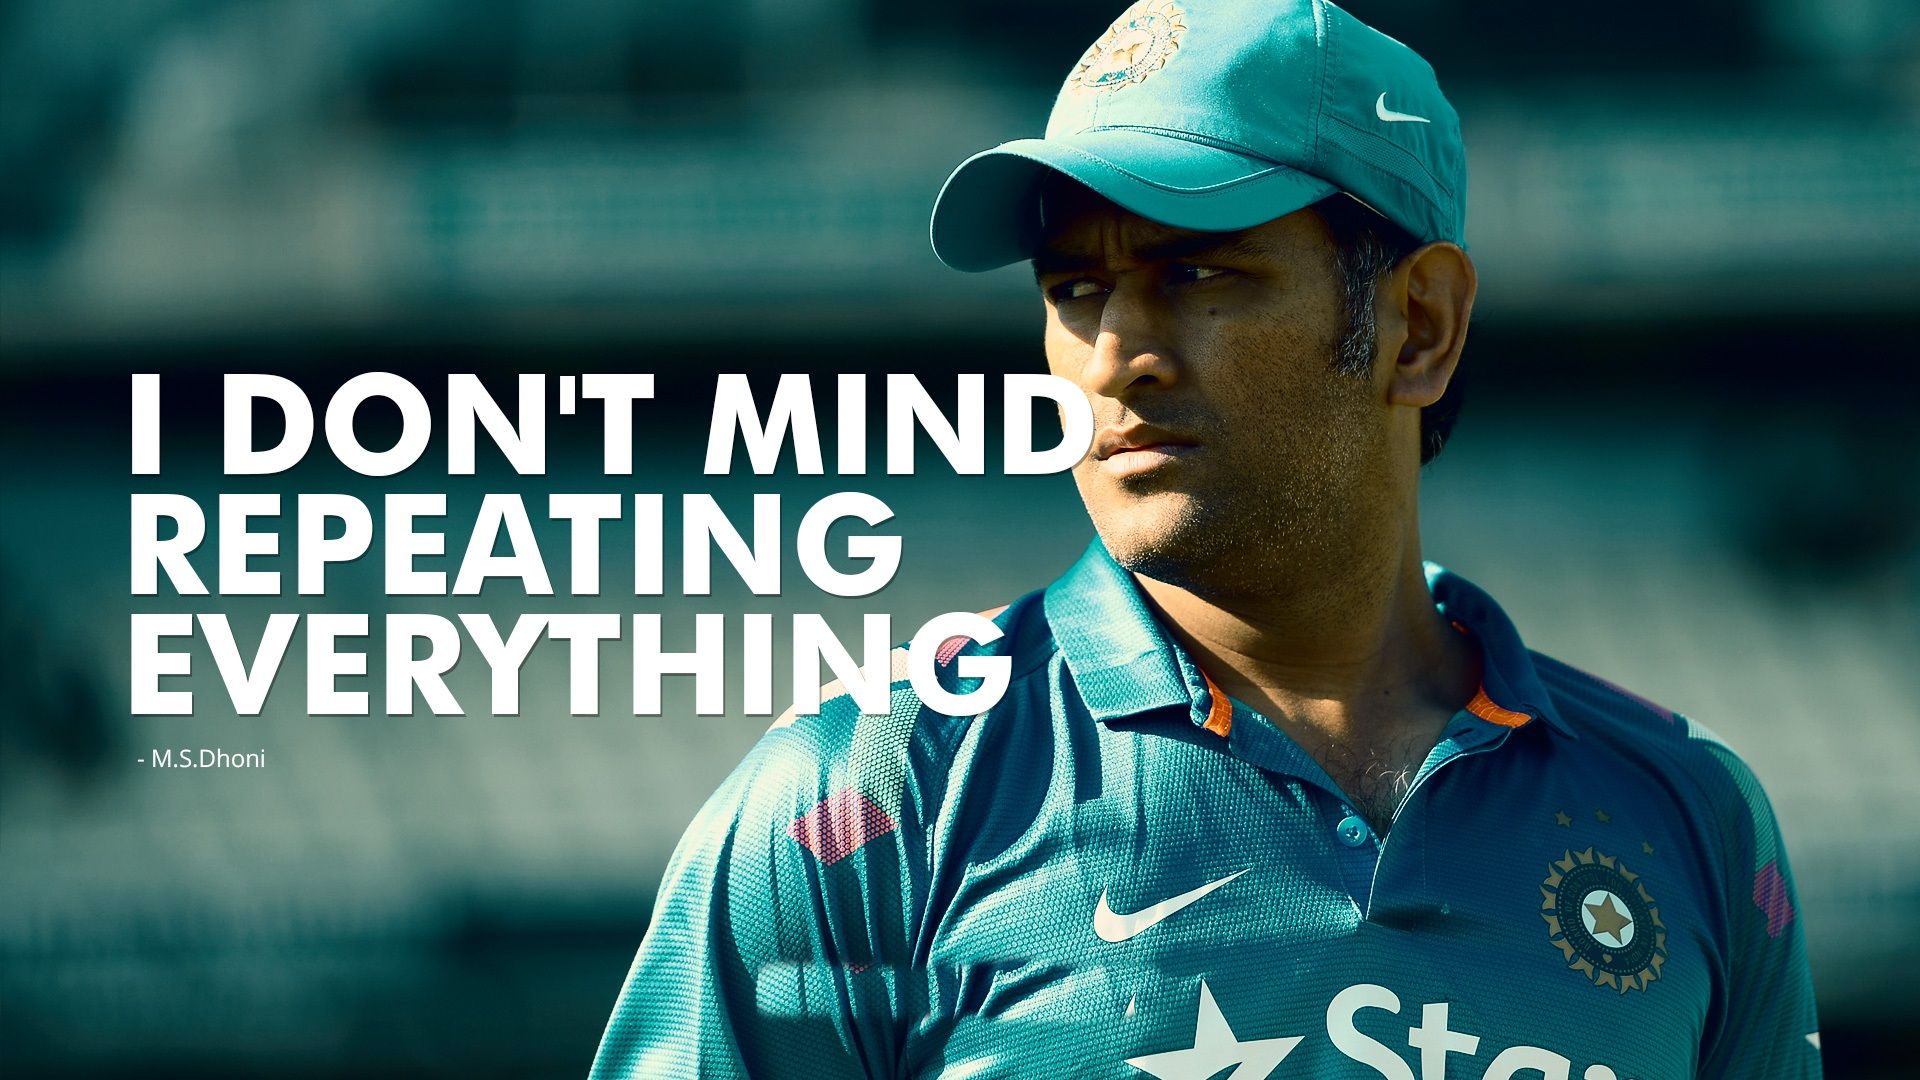 Ms Dhoni Quotes Hd Wallpapers